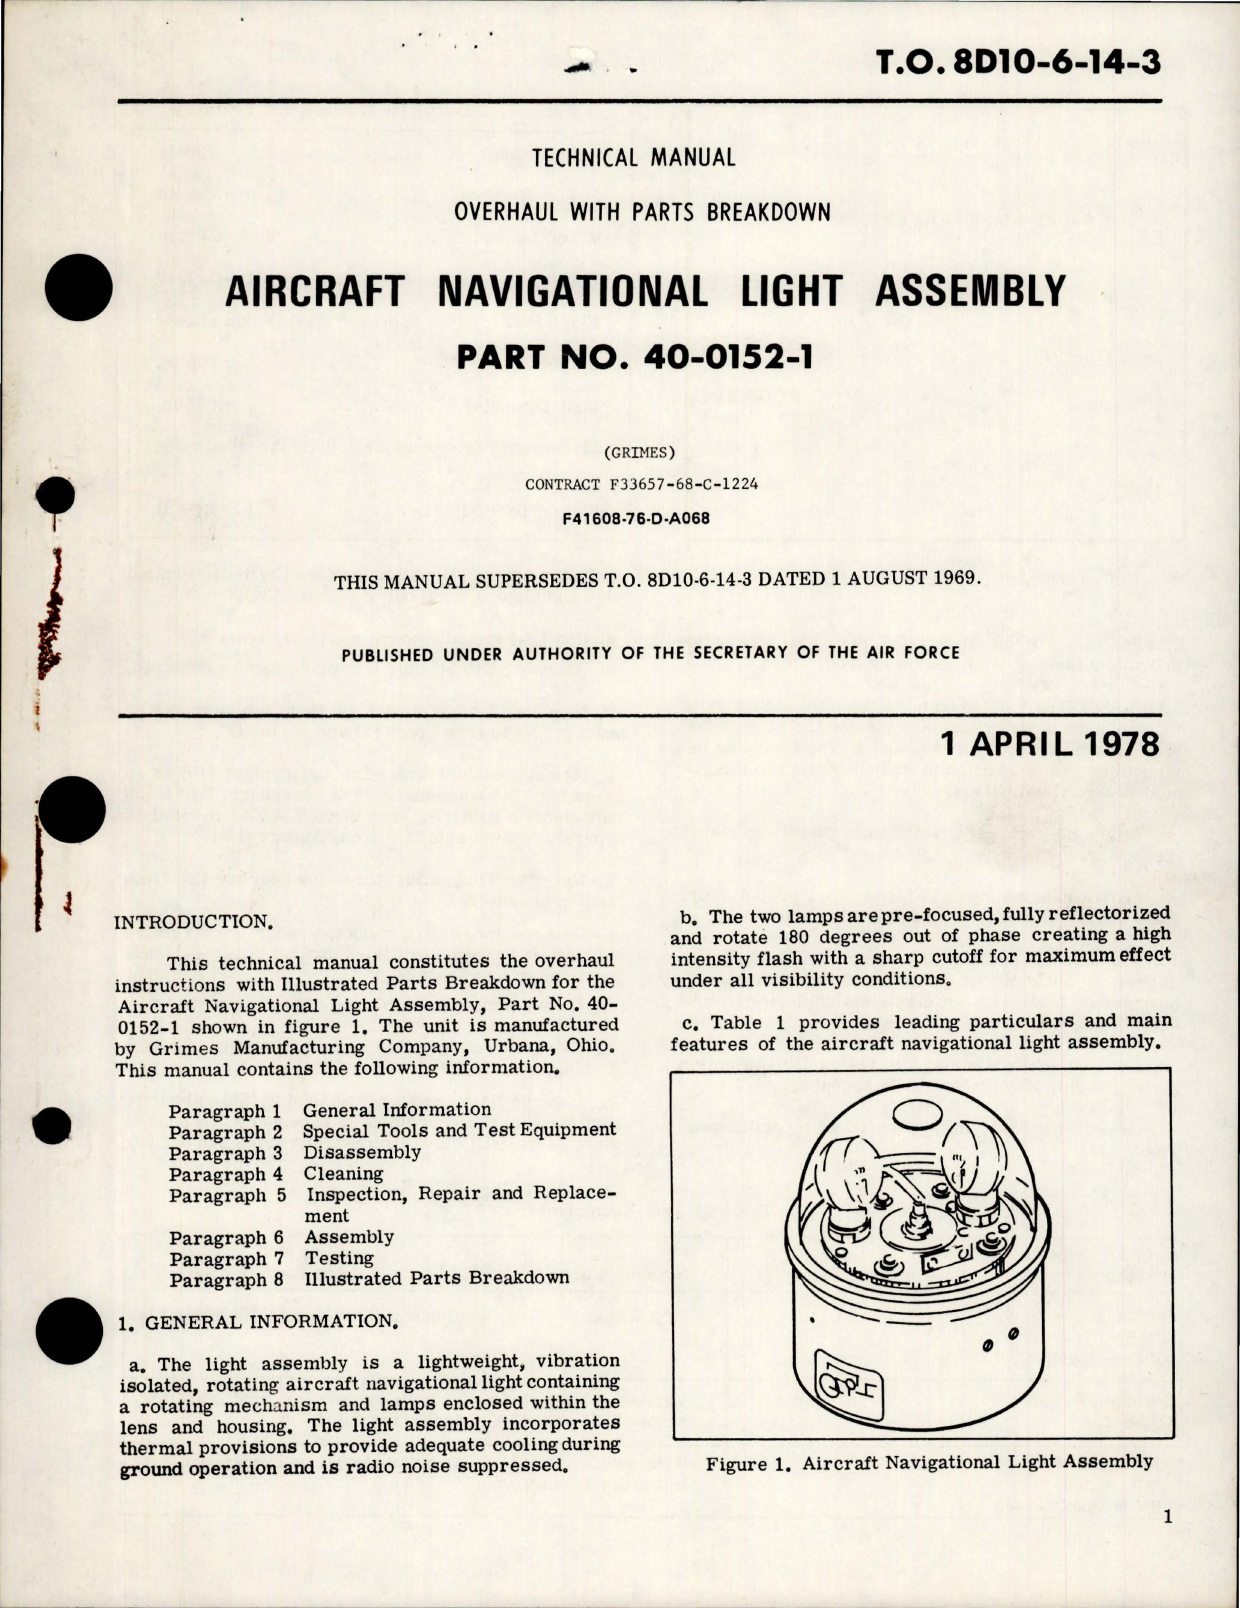 Sample page 1 from AirCorps Library document: Overhaul with Parts Breakdown for Aircraft Navigational Light Assembly - Part 40-0152-1 